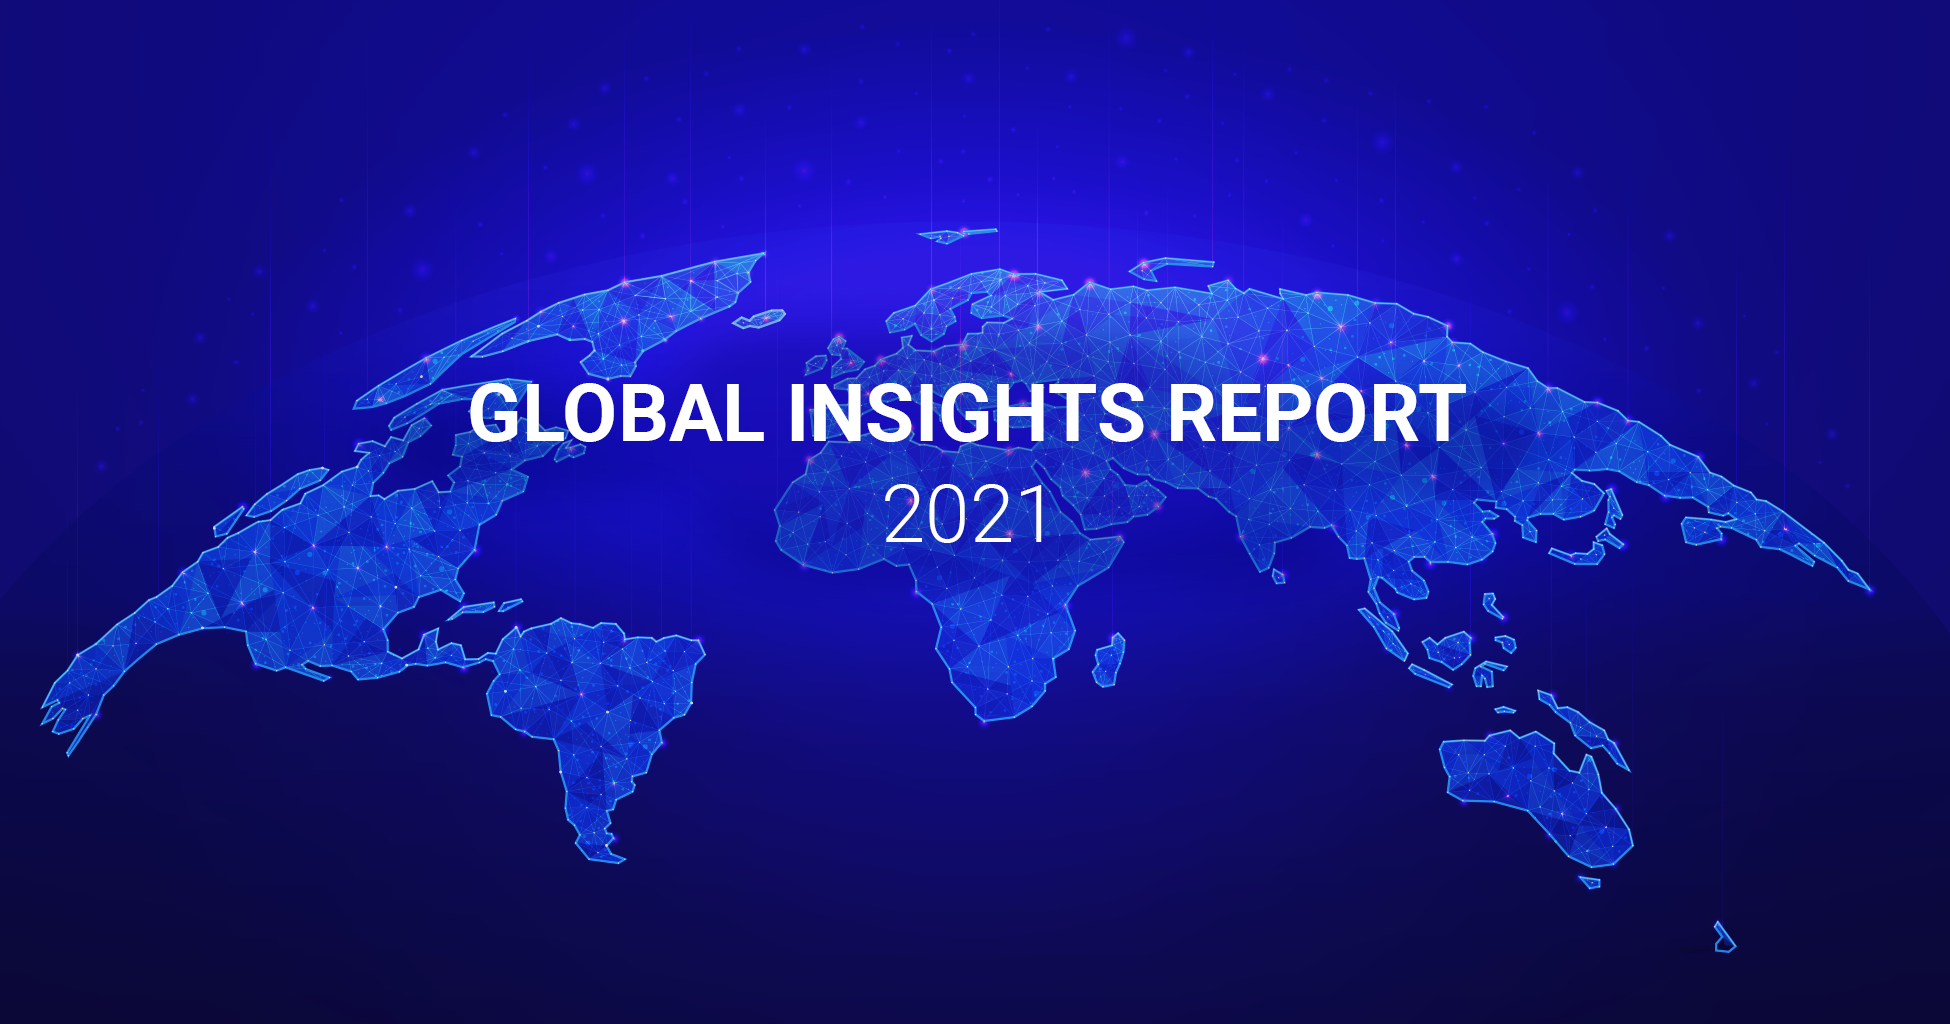 Our insights from 2021 new development report